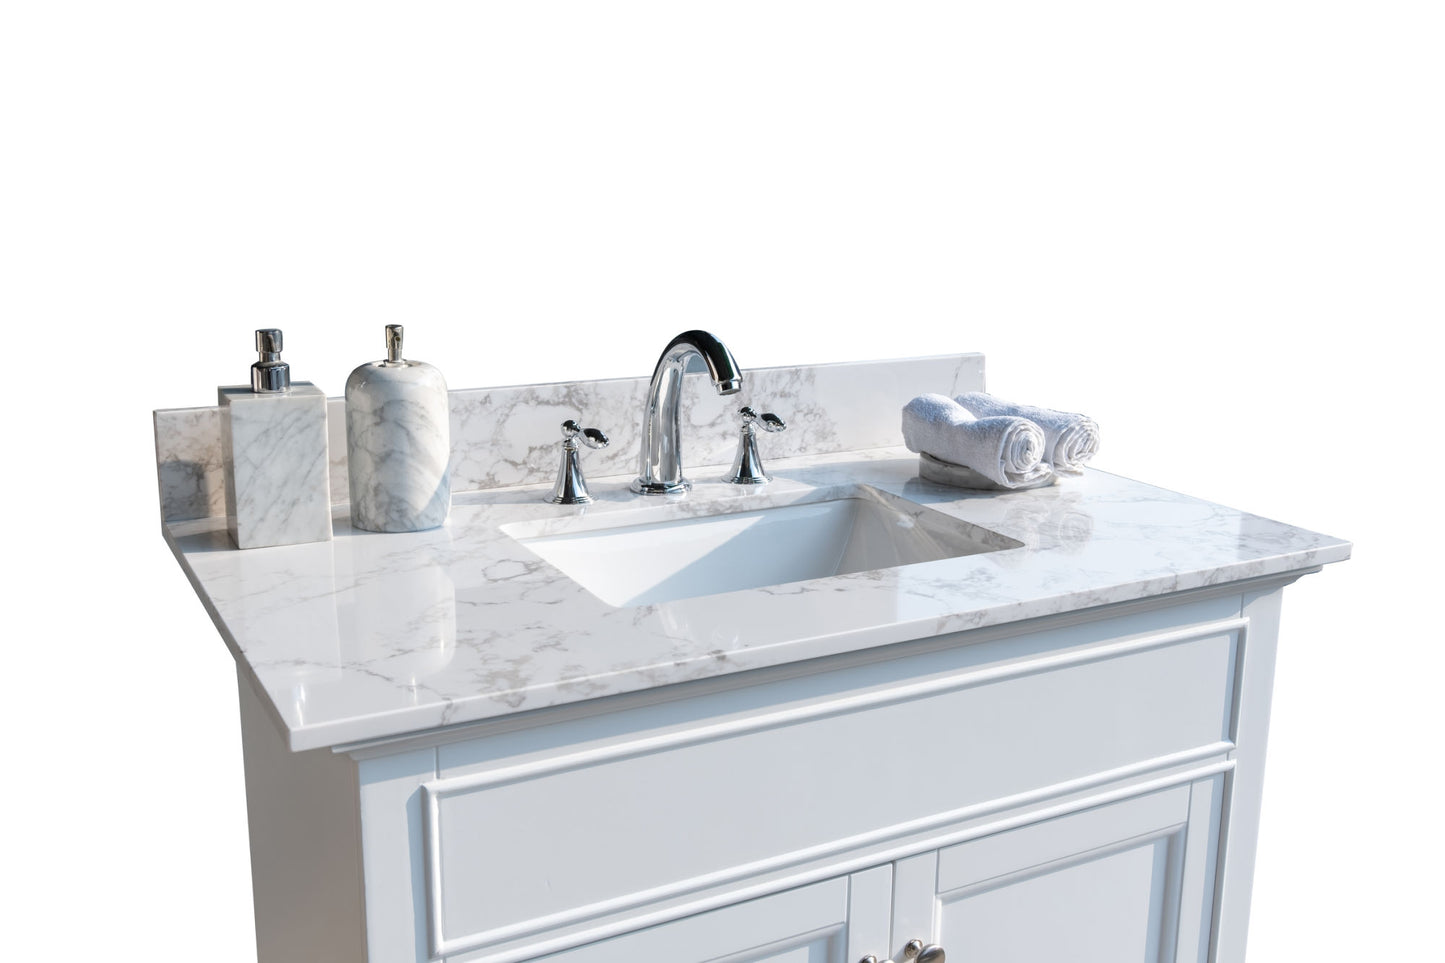 37inch bathroom vanity top stone carrara white new style tops with rectangle undermount ceramic sink and back splash with 3 faucet hole for bathrom cabinet